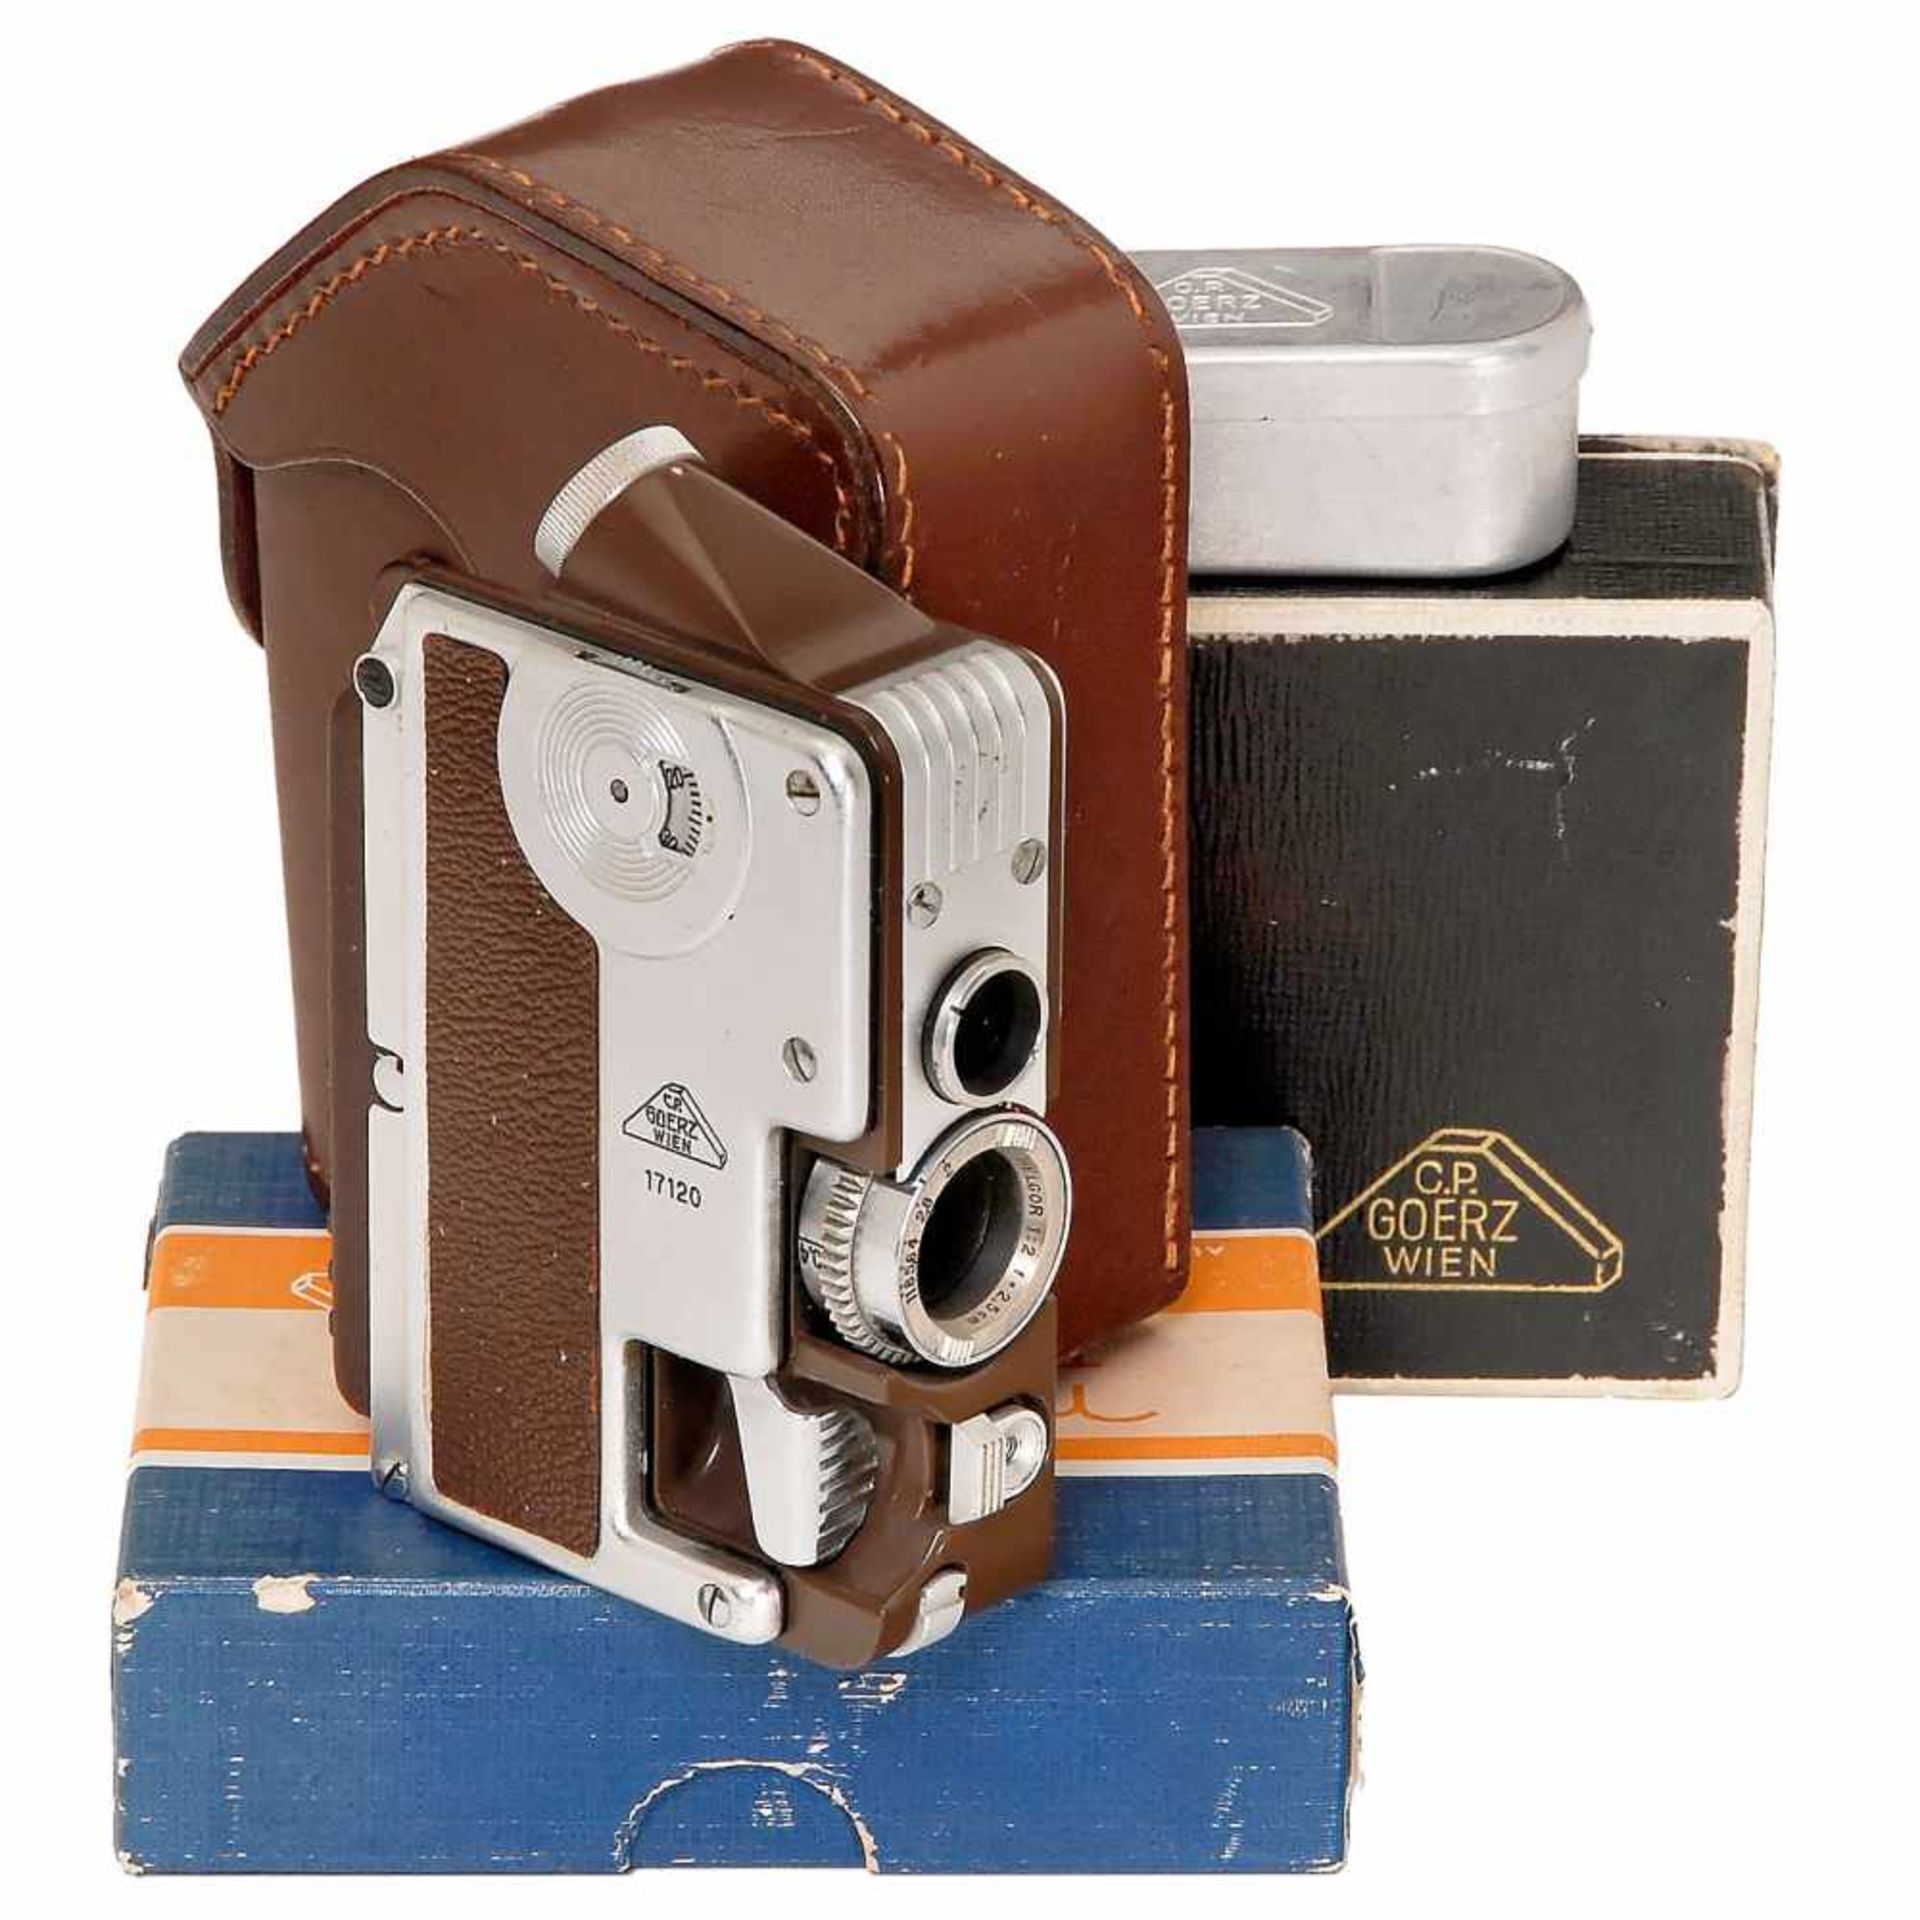 Goerz Minicord (I), 1951C.P. Goerz, Vienna. Subminiature TLR camera for 10 x 14 mm on 16mm film, no.